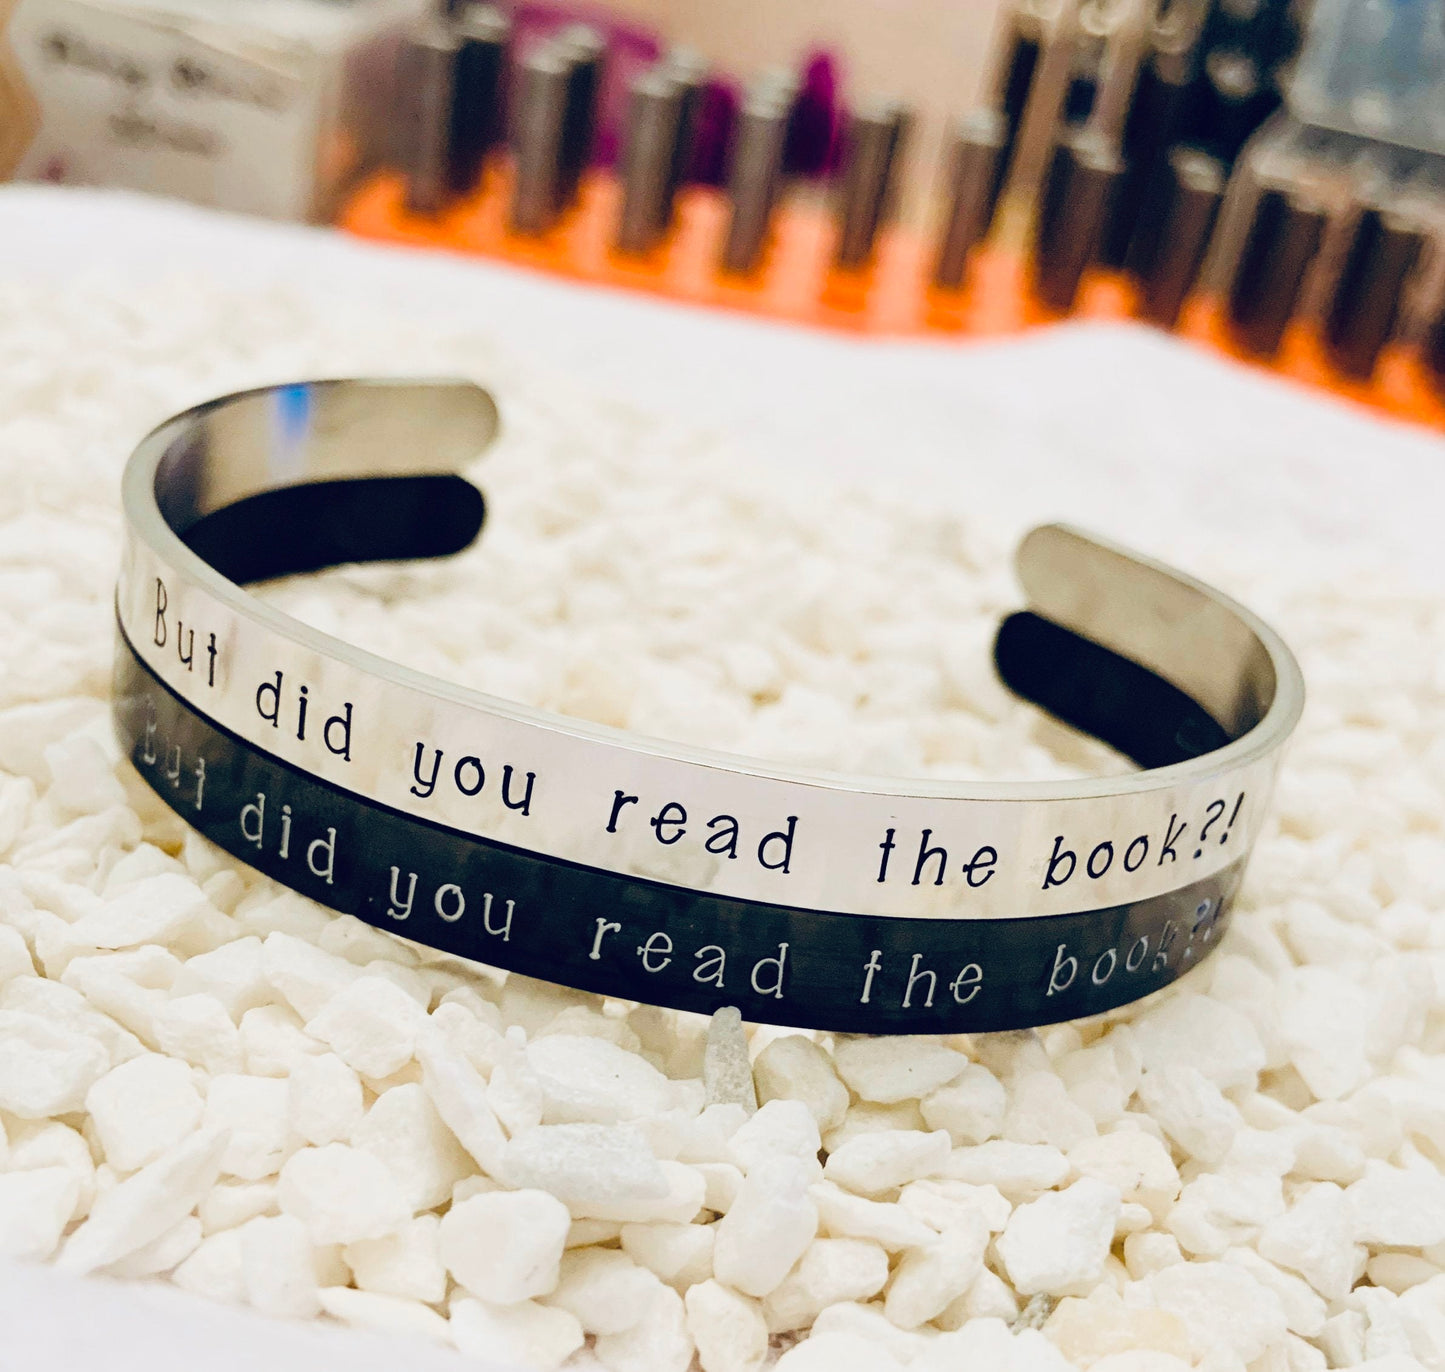 But did you read the book?! - Cuff Bracelet